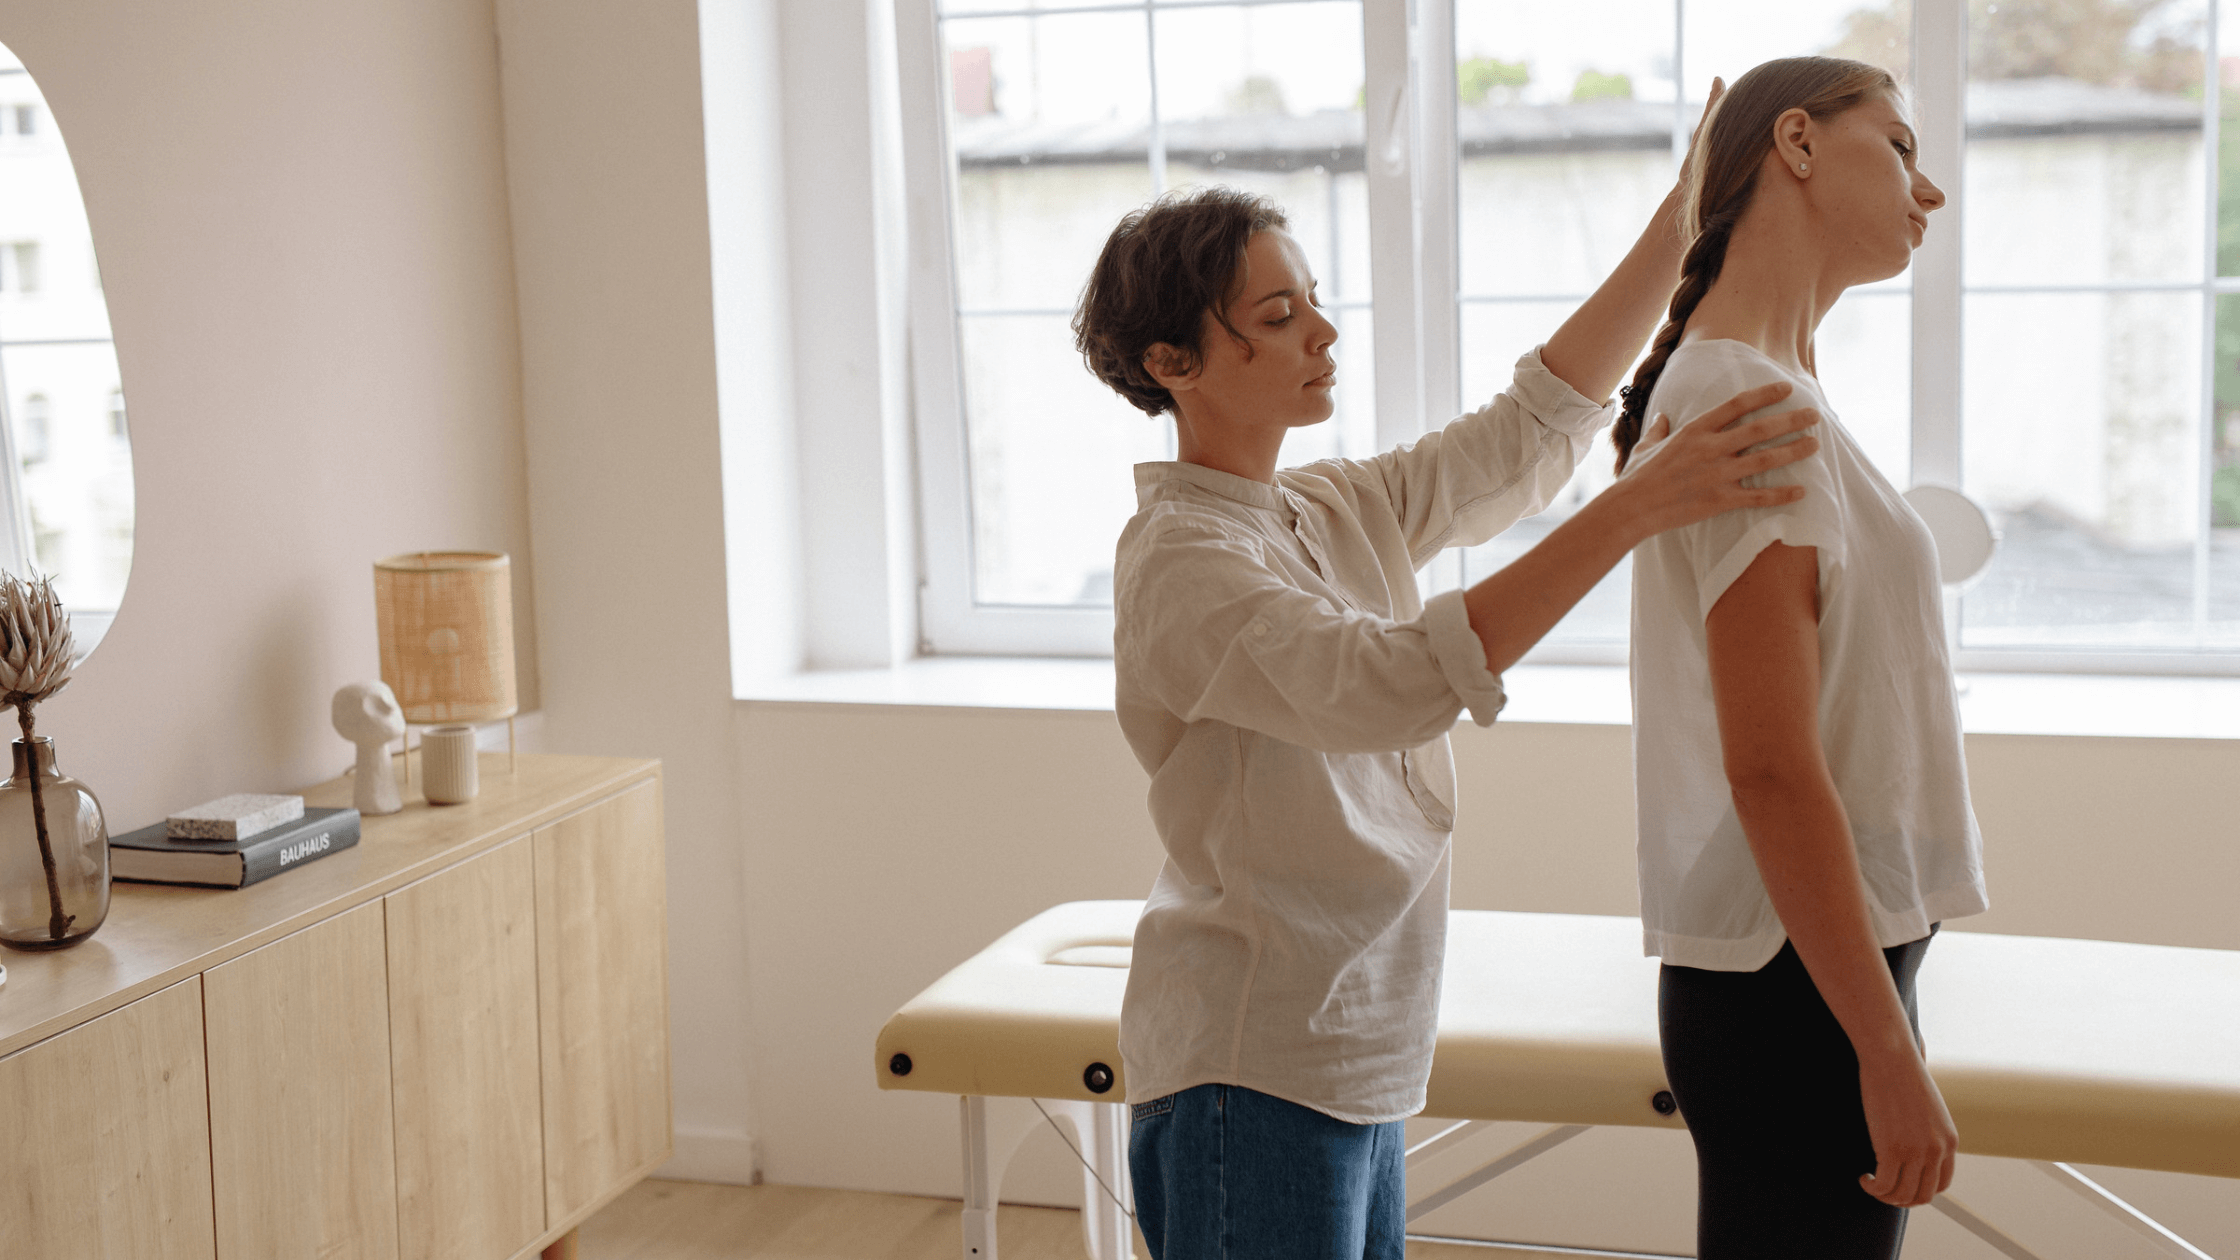 Physical Therapist vs. Physical Therapist Assistant: How Are They Different?